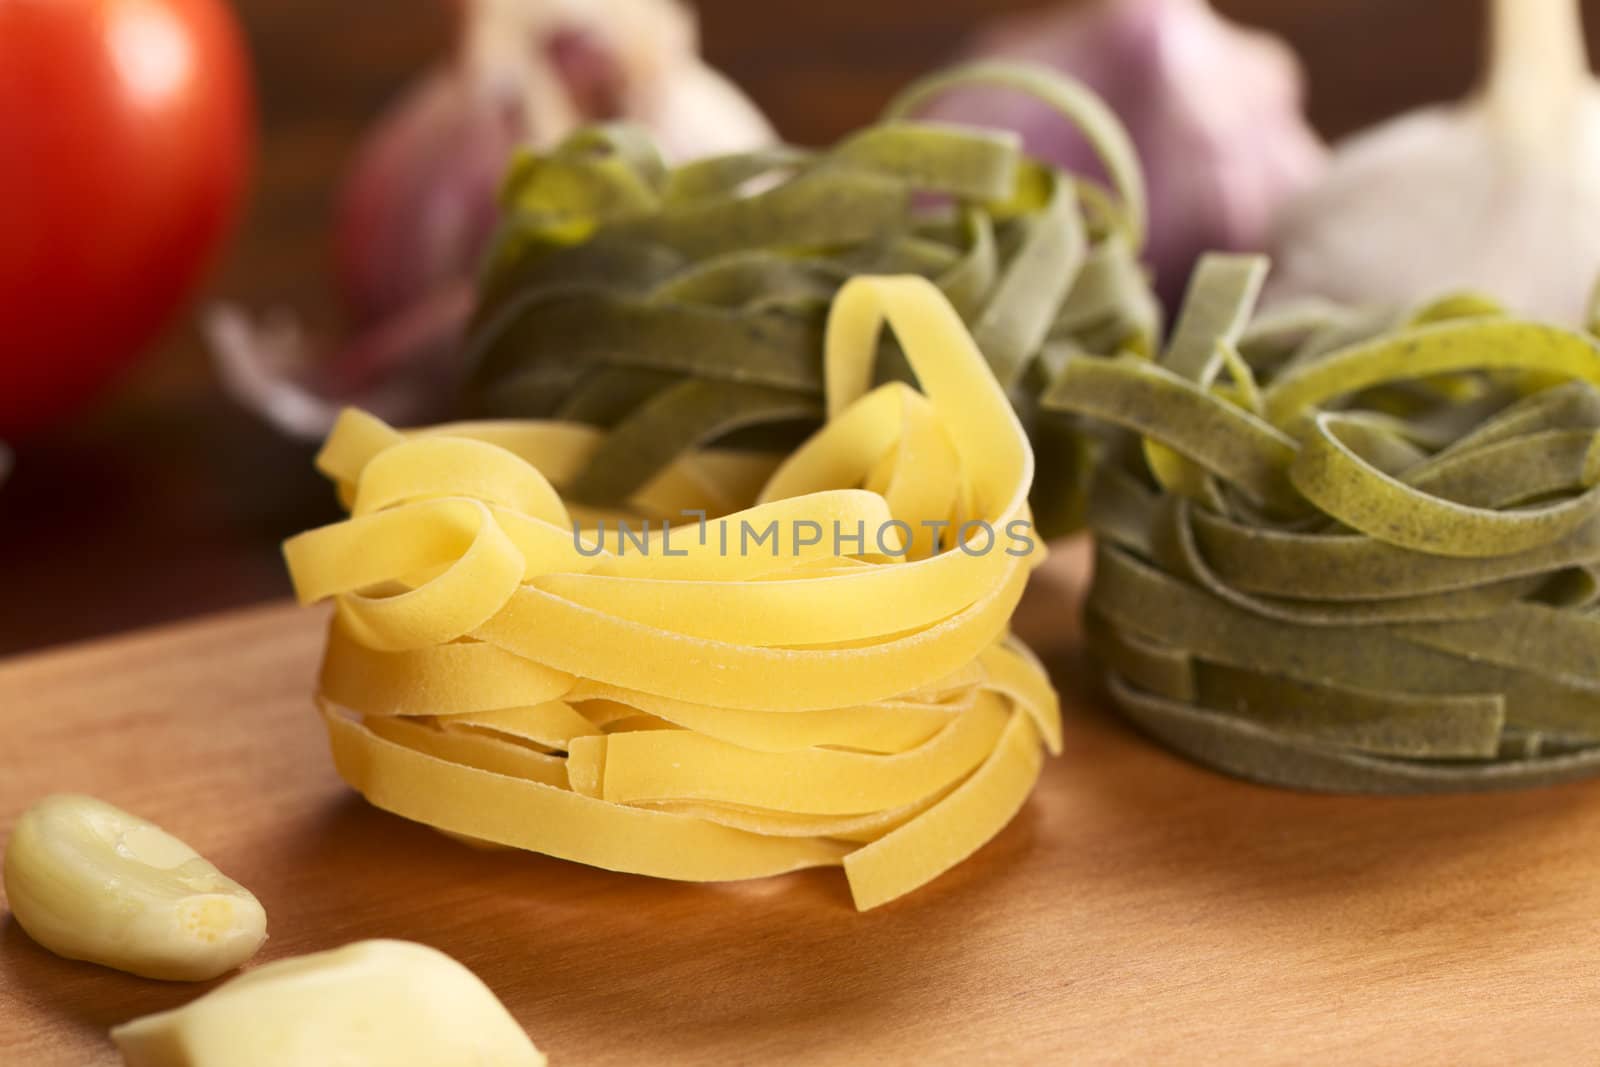 Raw tagliatelle paglia e fieno (straw and hay). Plain yellow pasta and with spinach flavored green pasta surrounded by garlic and tomato (Selective Focus, Focus on the front of the upper yellow tagliatelle strips) 